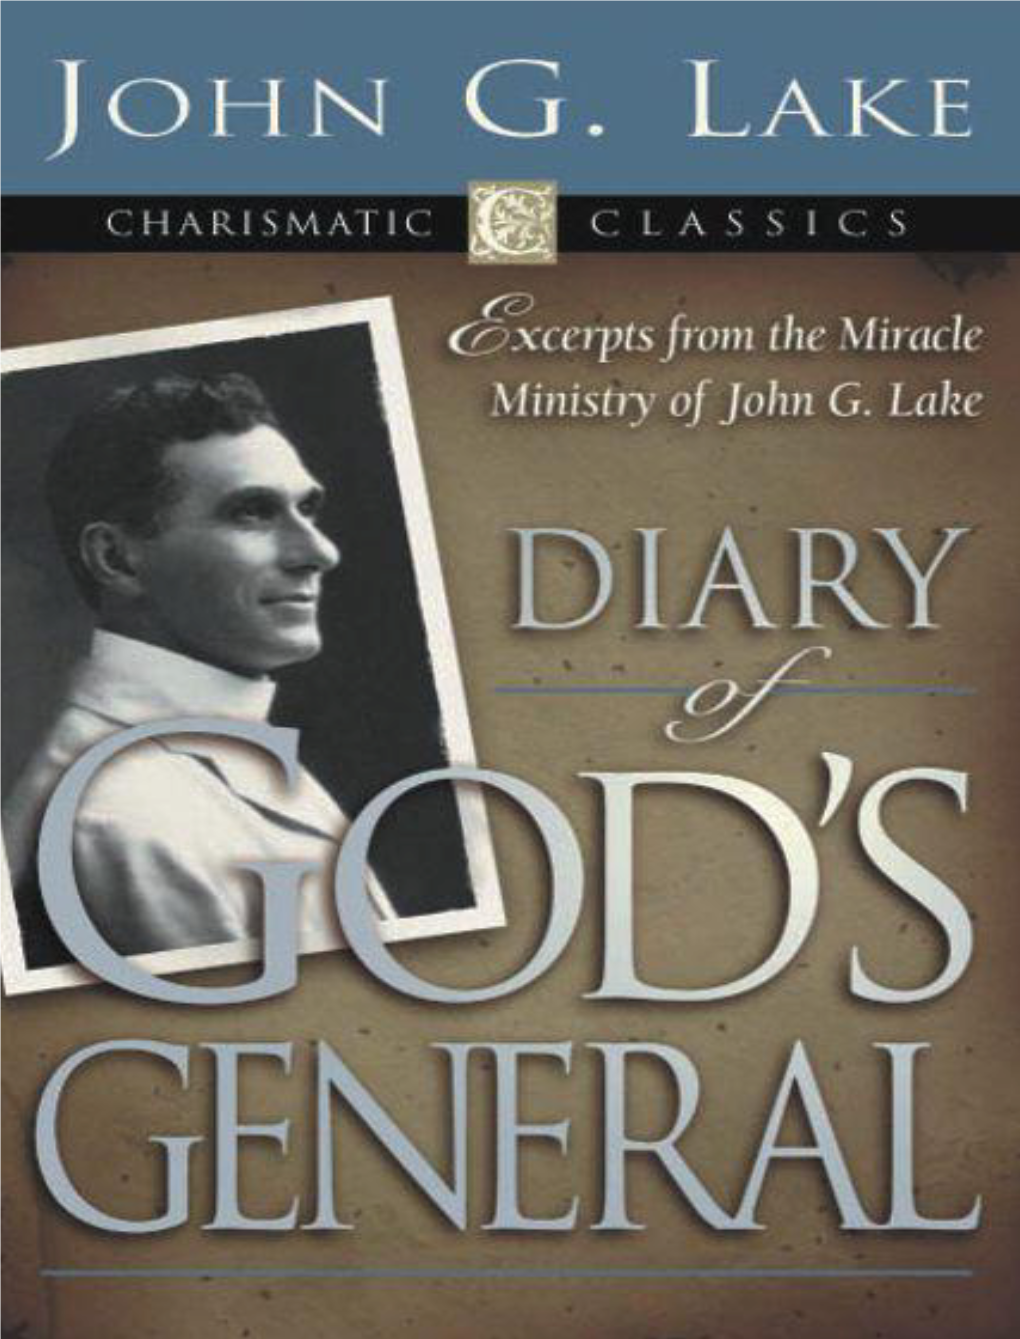 Diary of God's General